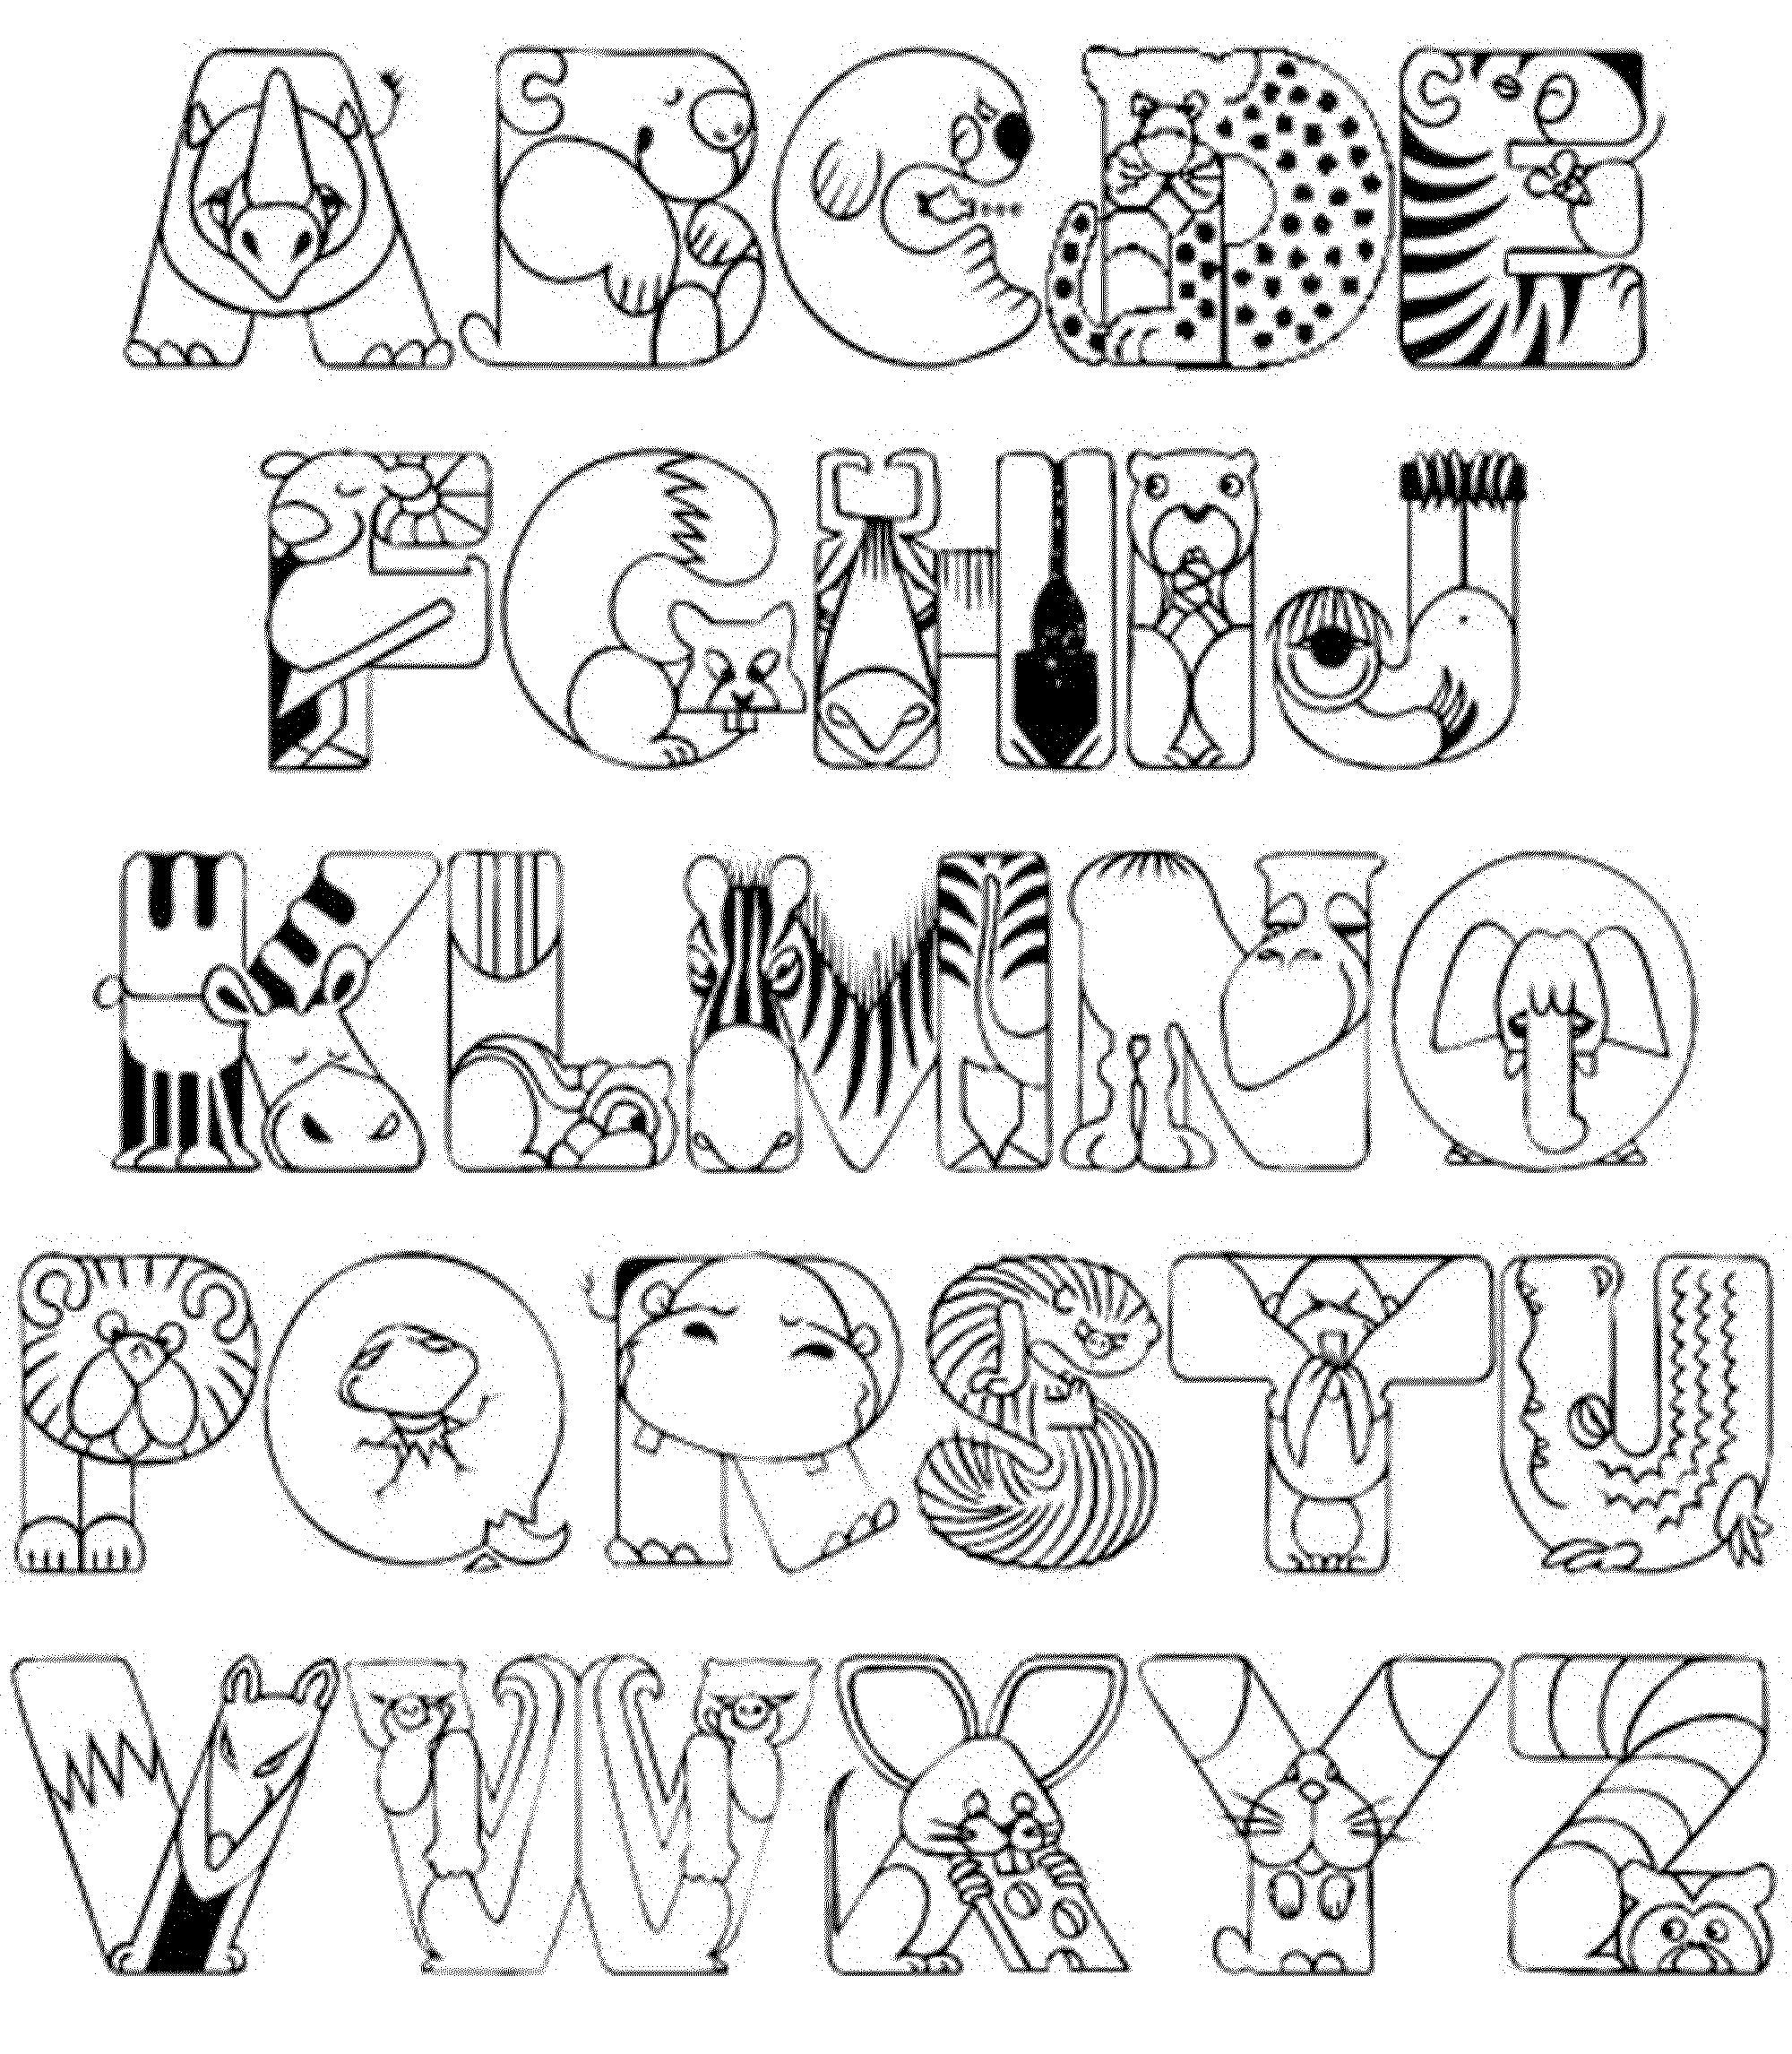 Abc Coloring Pages Free Printable At GetDrawings Free Download